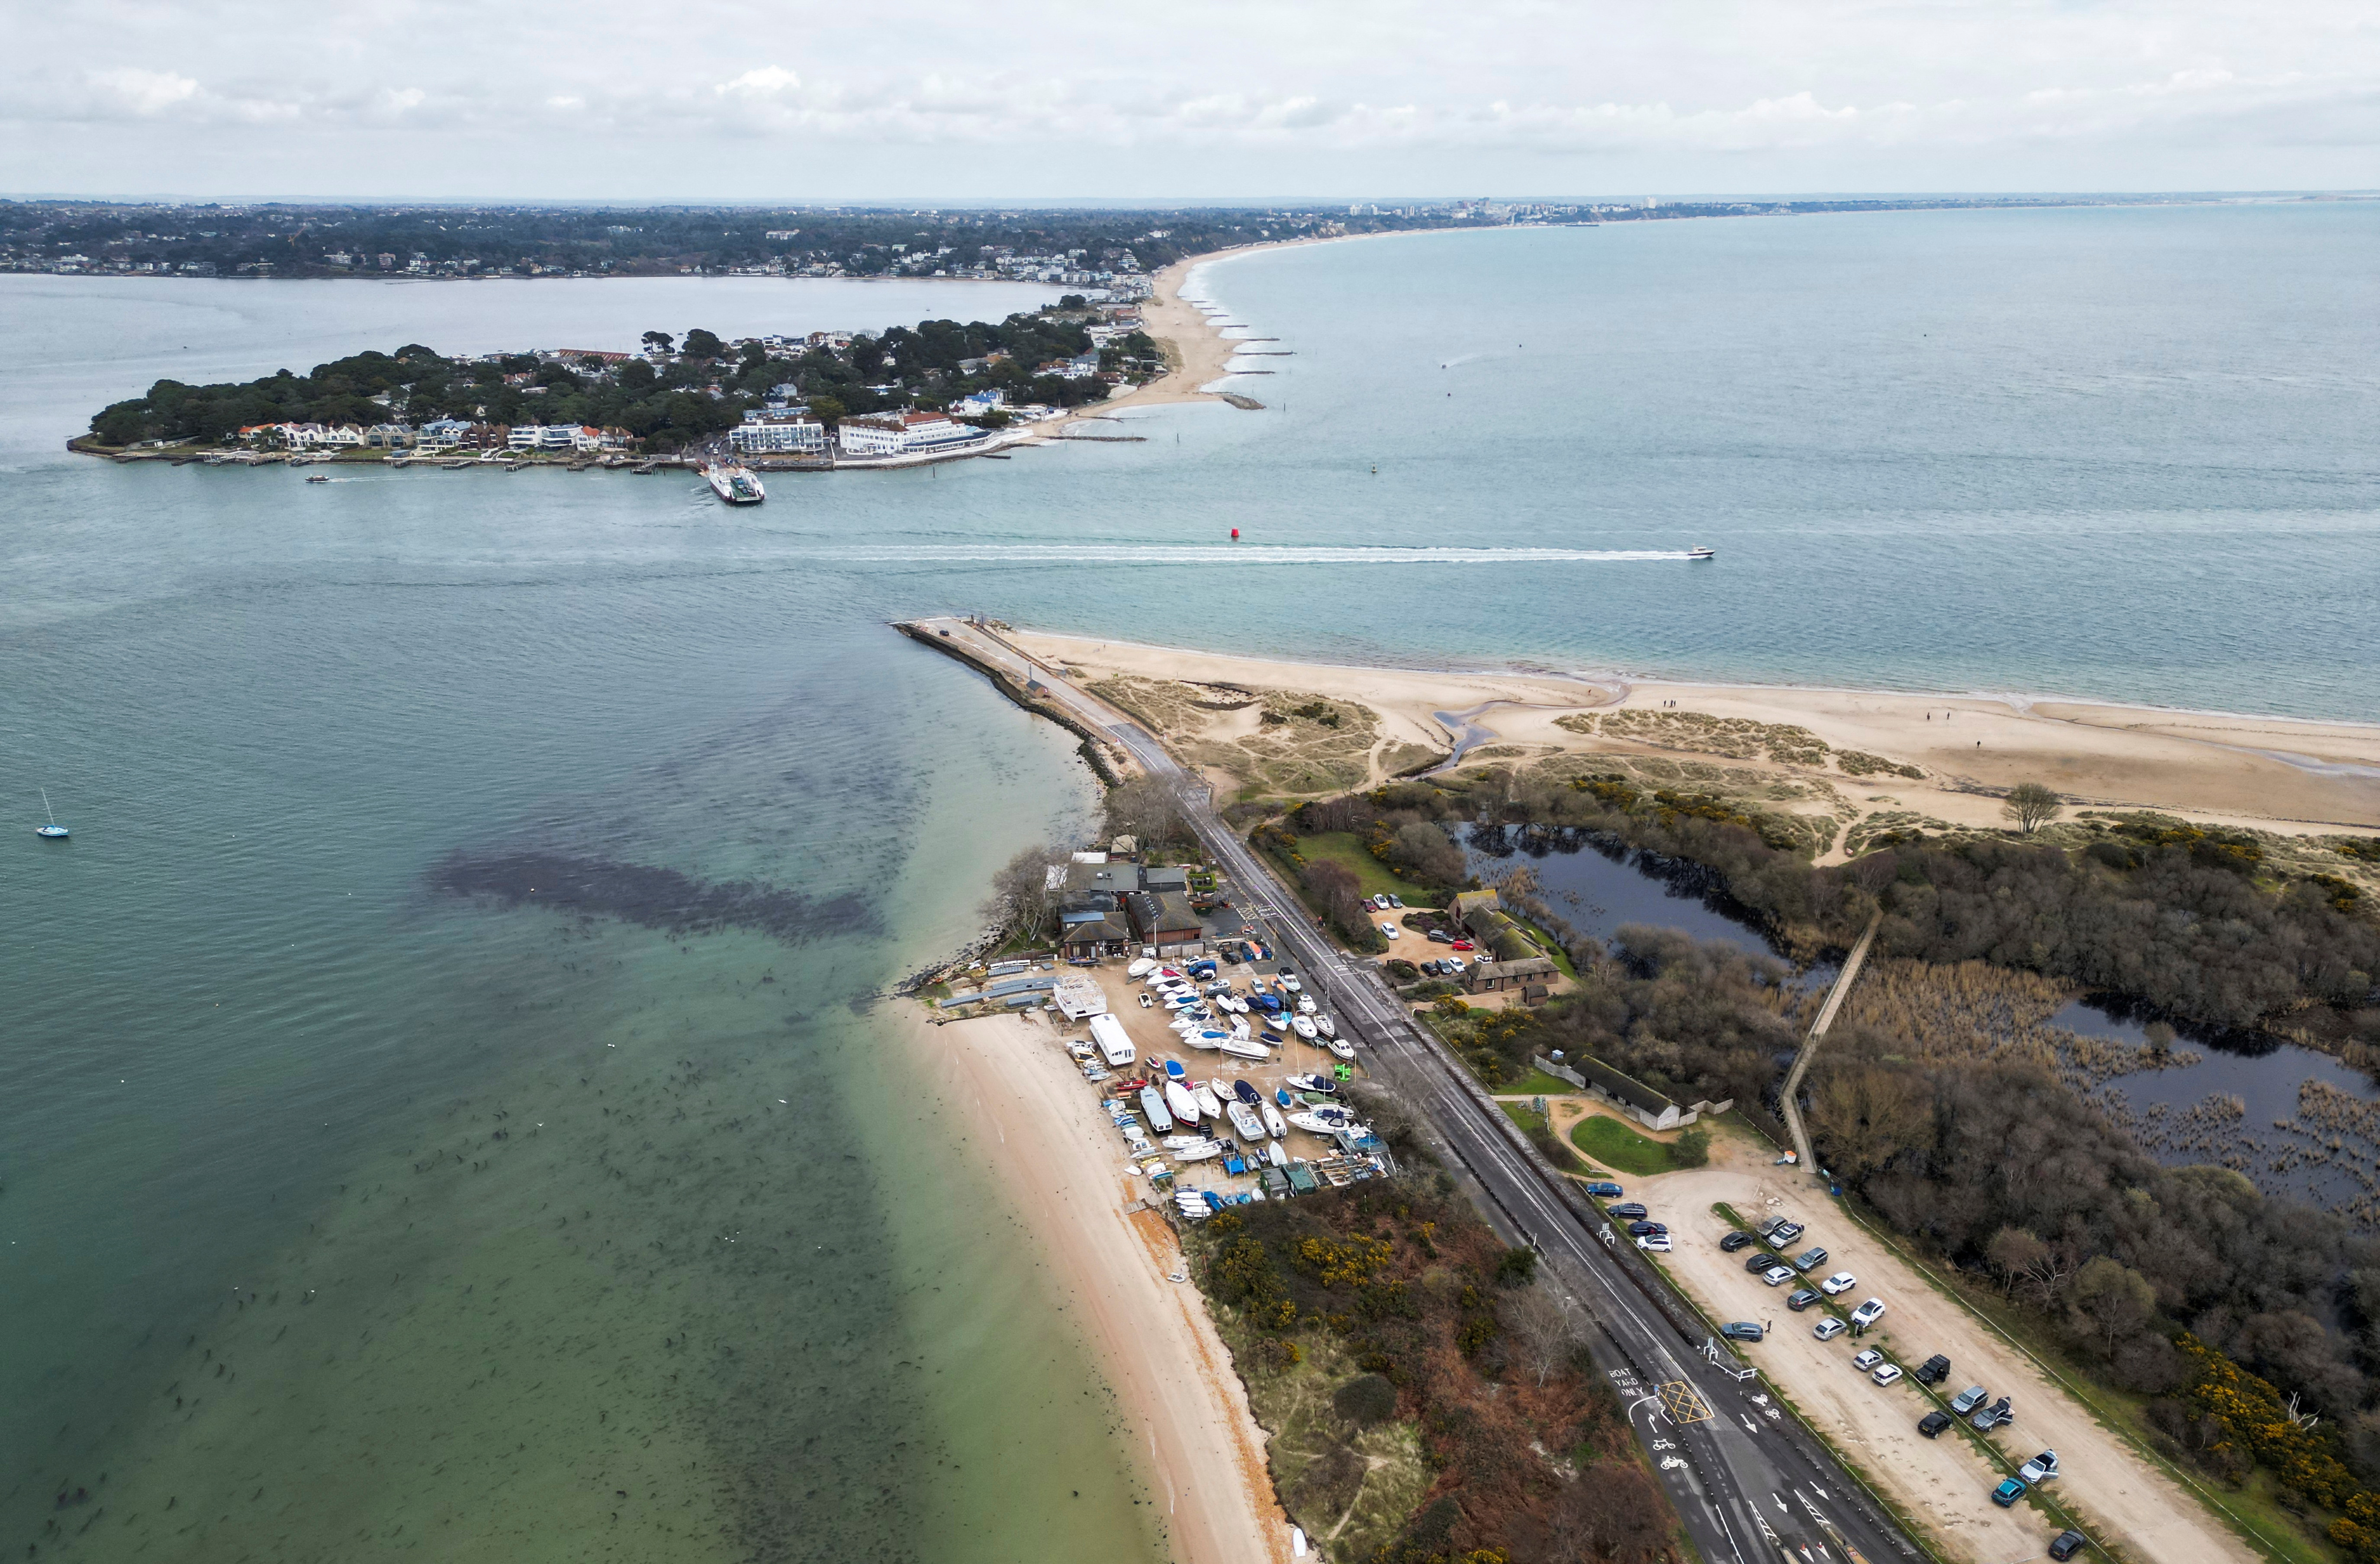 General view of Poole Harbour in Dorset